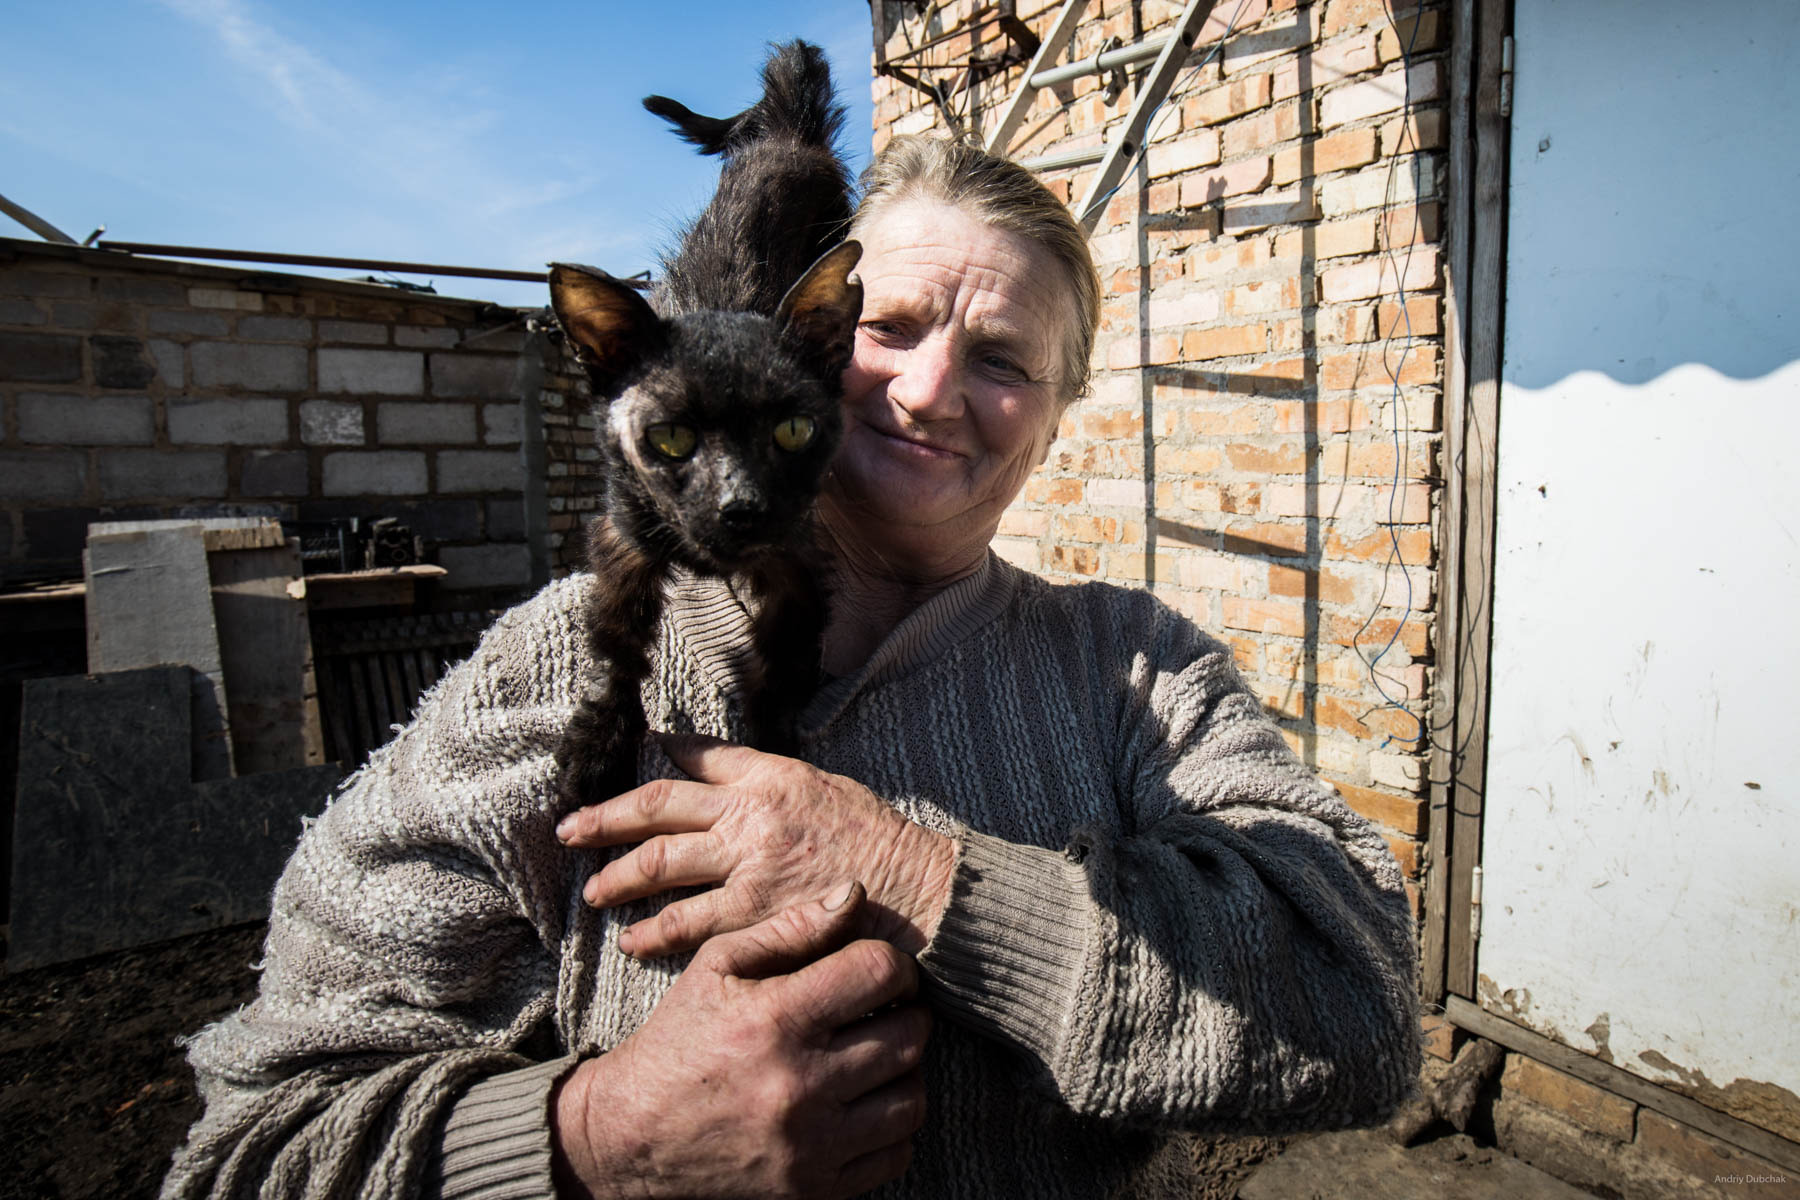 "Hello from Vodyane". Baba Zoe with her cat Timka. The cat was wounded and ill, the woman nursed it, as she could. Vodyane, March 2018.